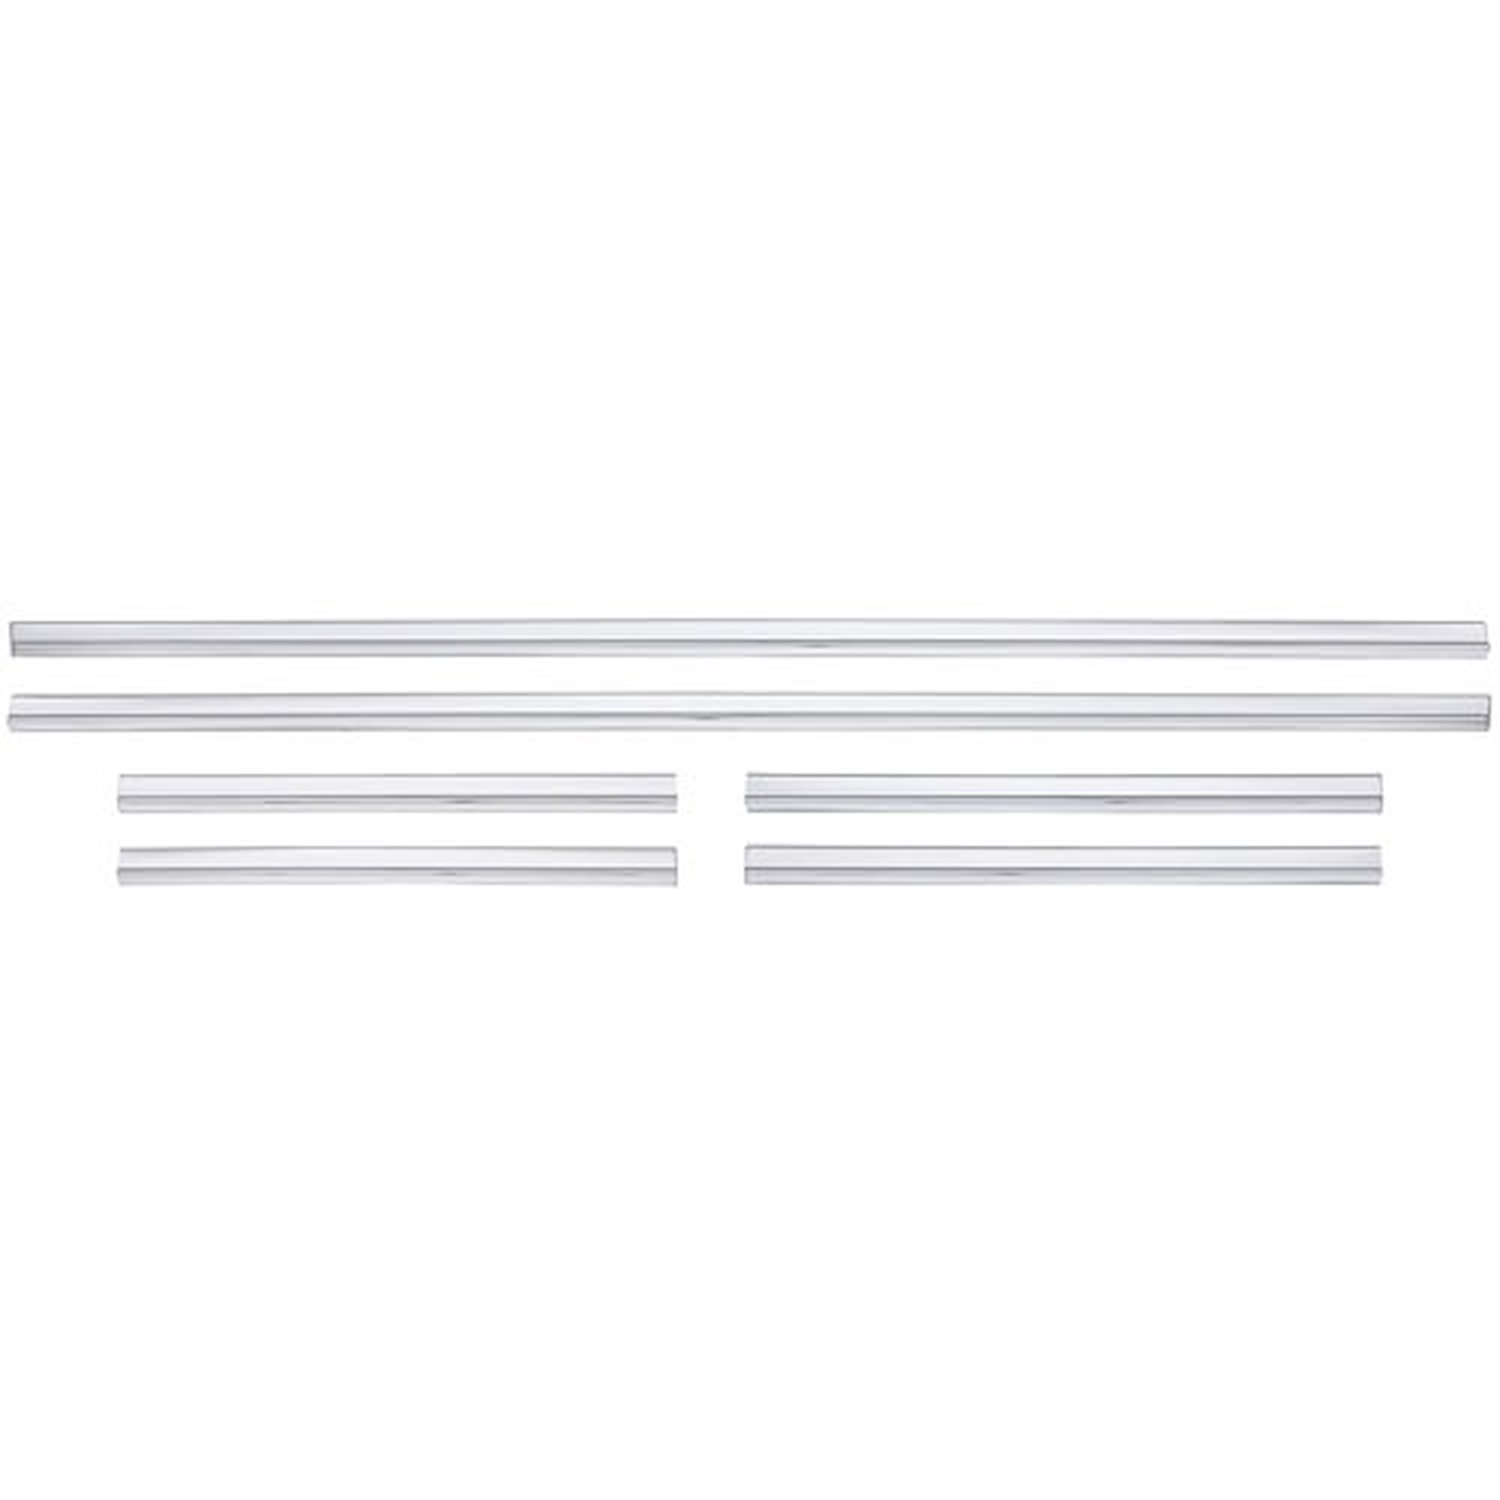 Lower Body Side Molding Kit 1978-87 Chevy El Camino